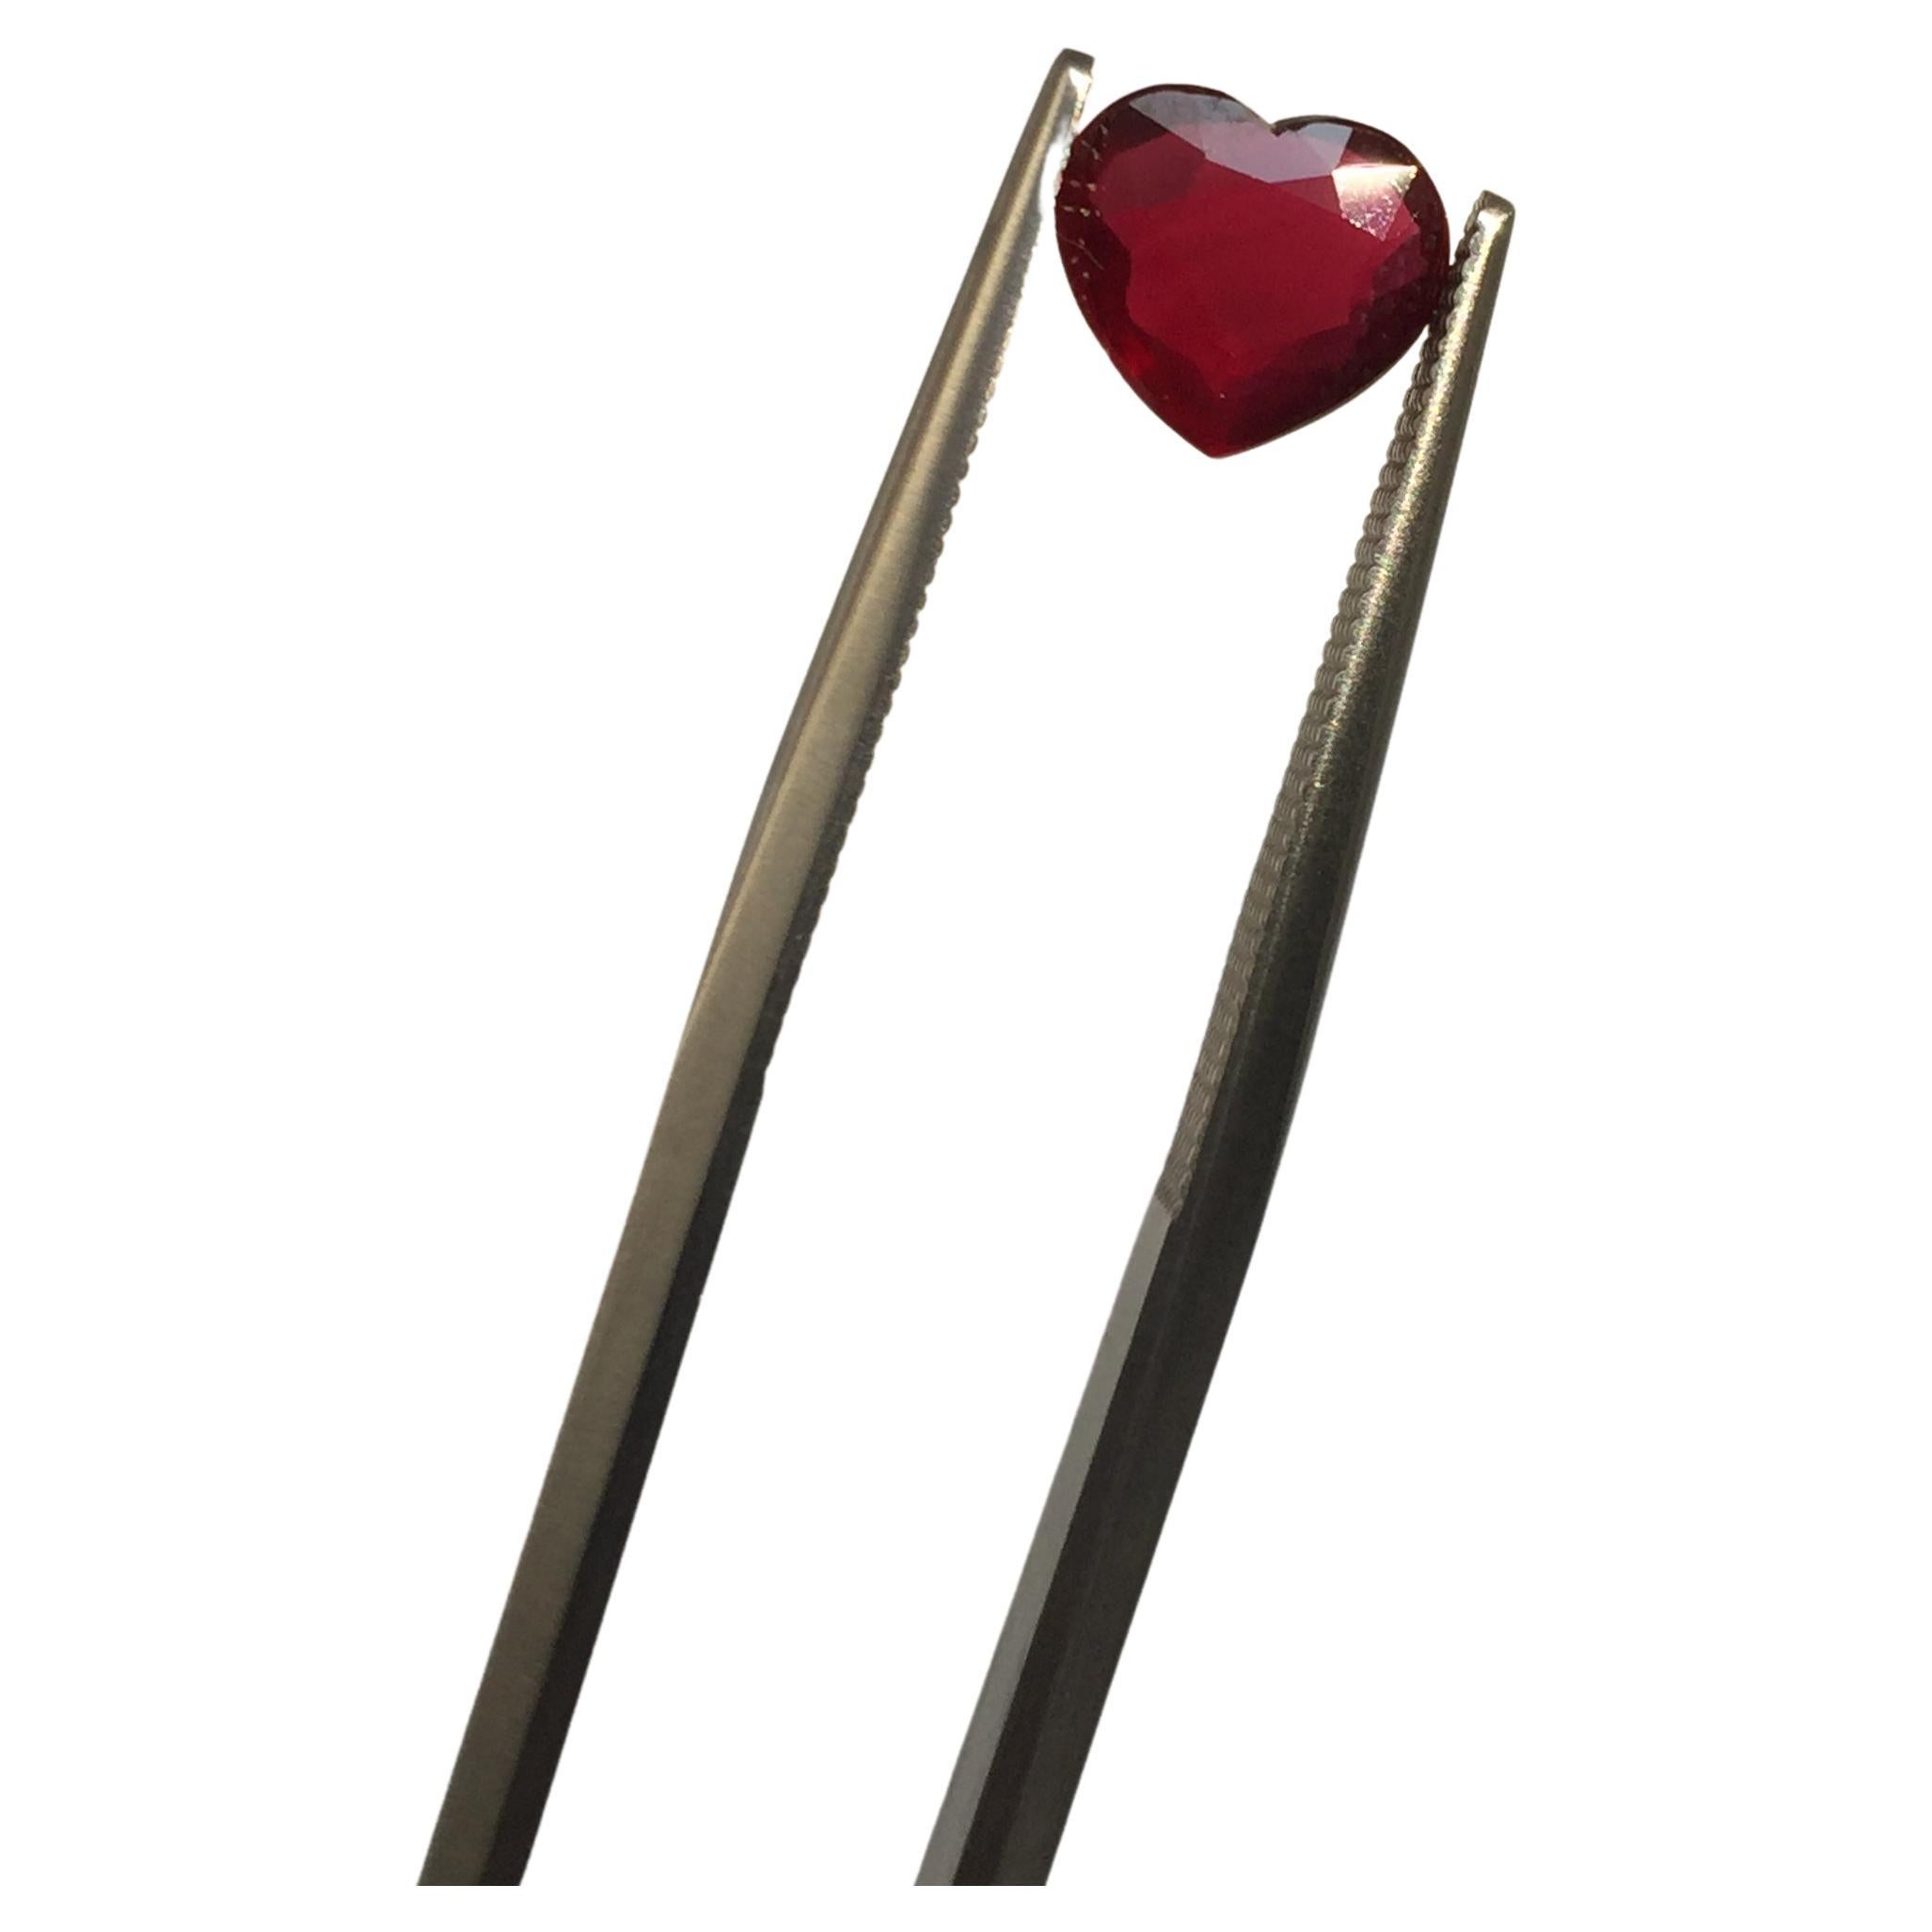 1.53 Carat Heart- Shaped Mozambique Ruby for High Jewellery